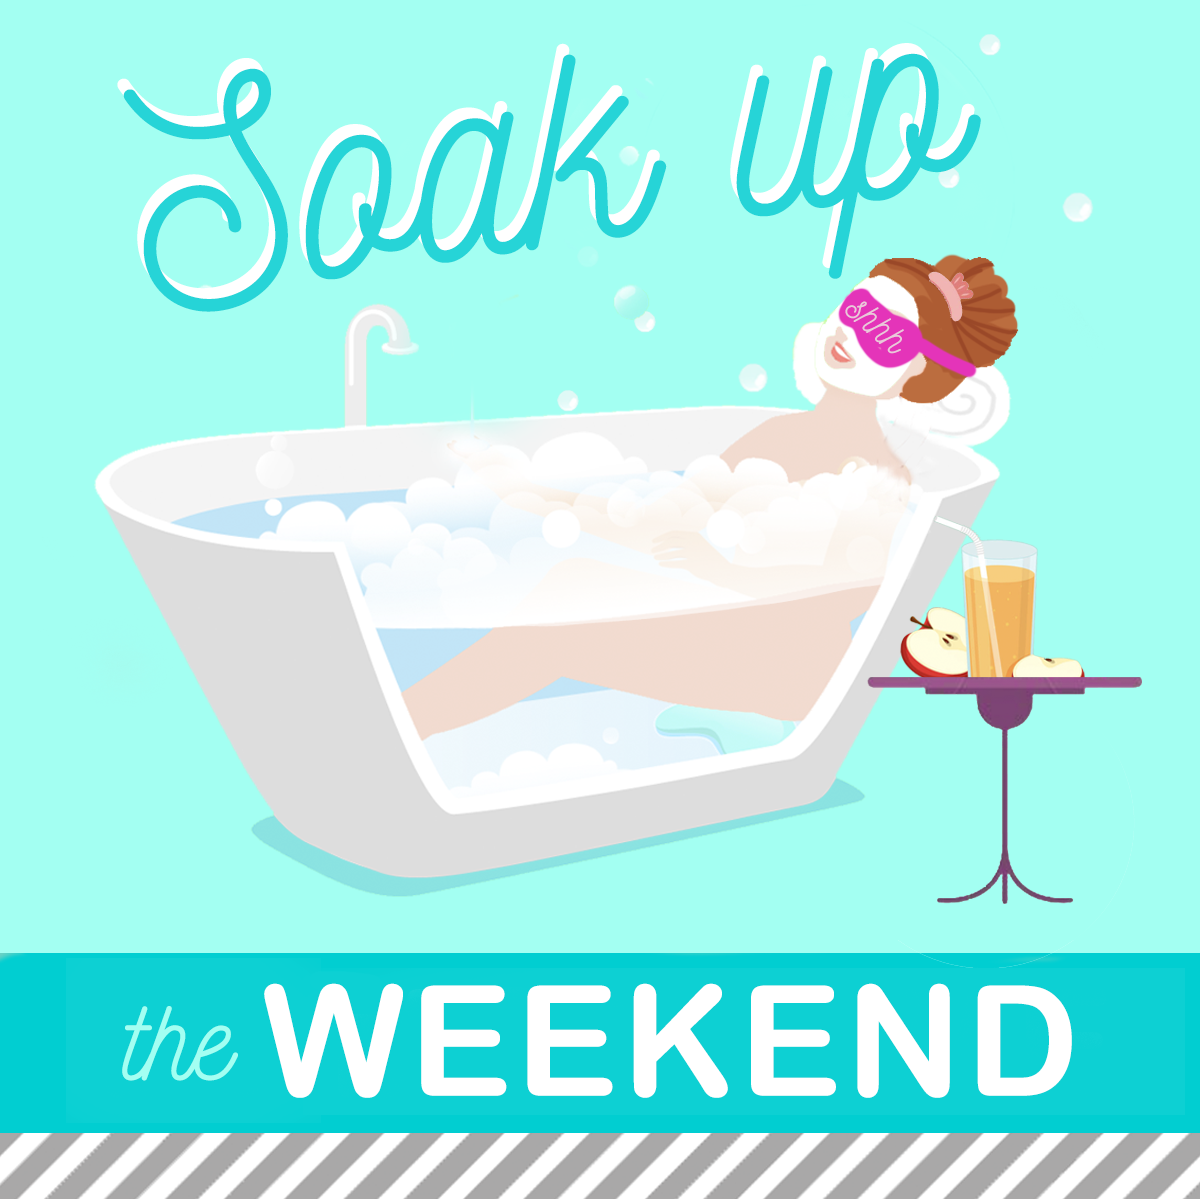 BB Animation Square Soak up the weekend.png